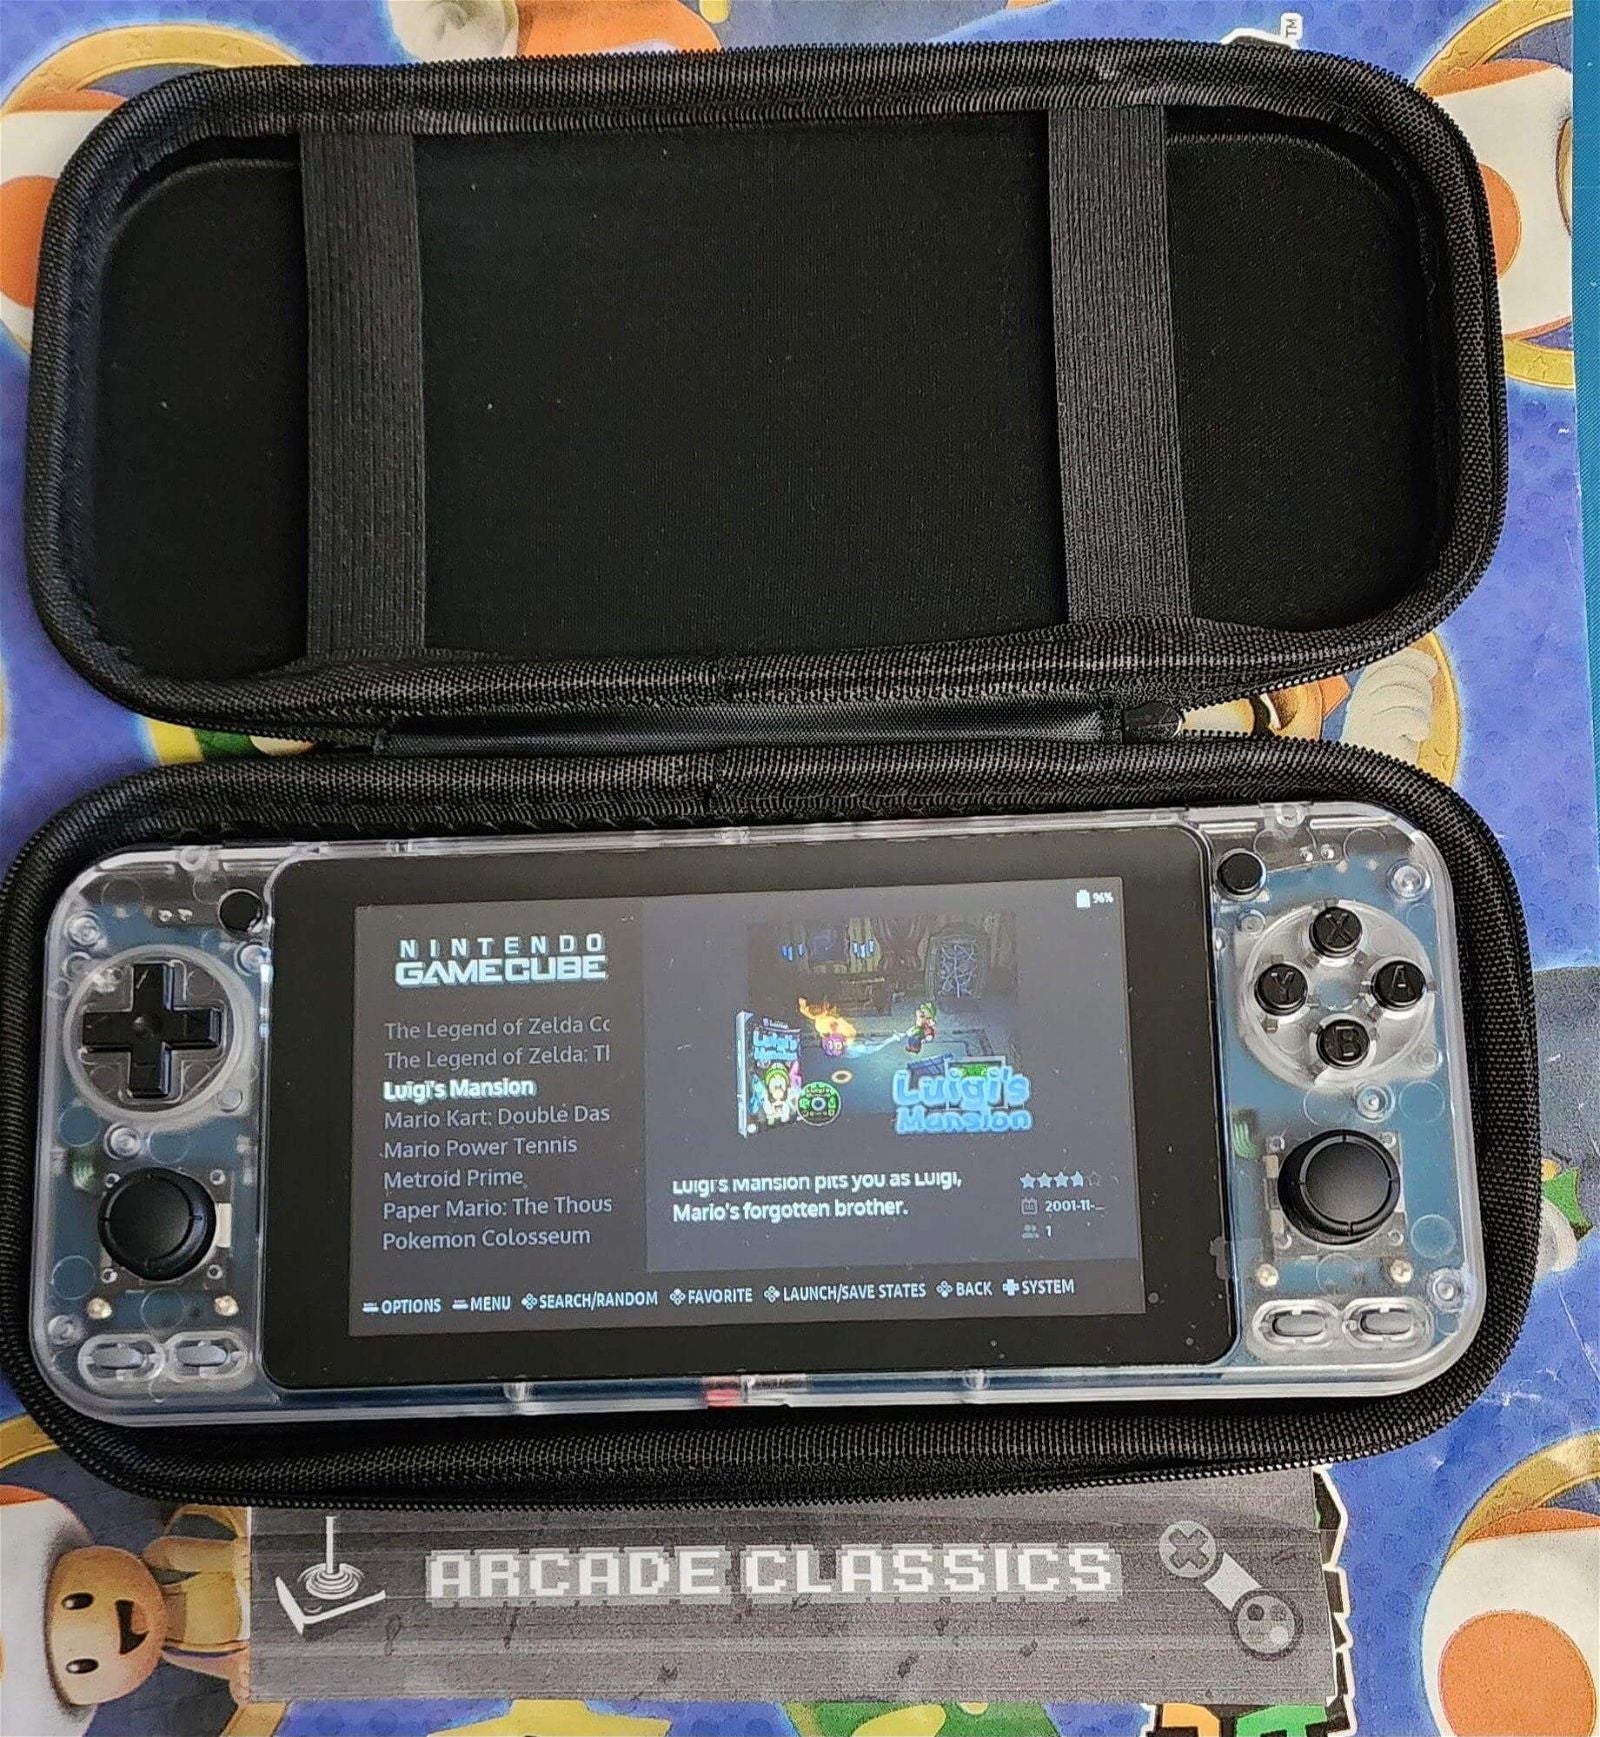 New custom OS software oDroid Go Ultra & super with 256GB SD handheld portable gaming console, excellent performance - Arcadeclassics